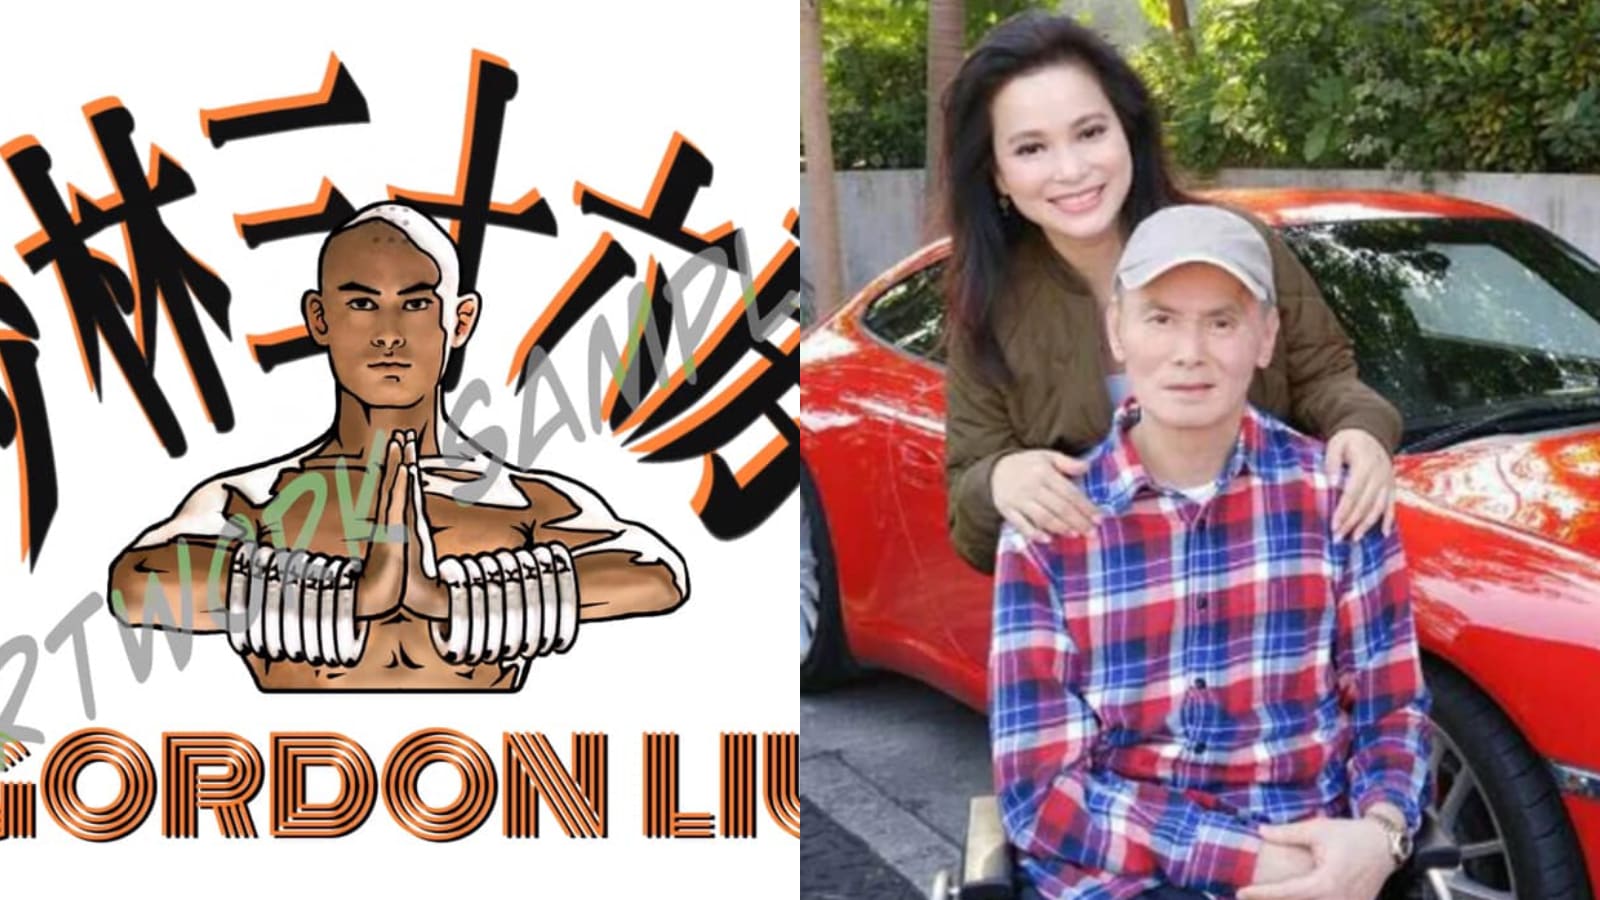 Gordon Liu’s Fans Are Not Selling T-Shirts To Raise Funds For His Nursing Home Fees, But They Hope To Generate Stable Income For Him